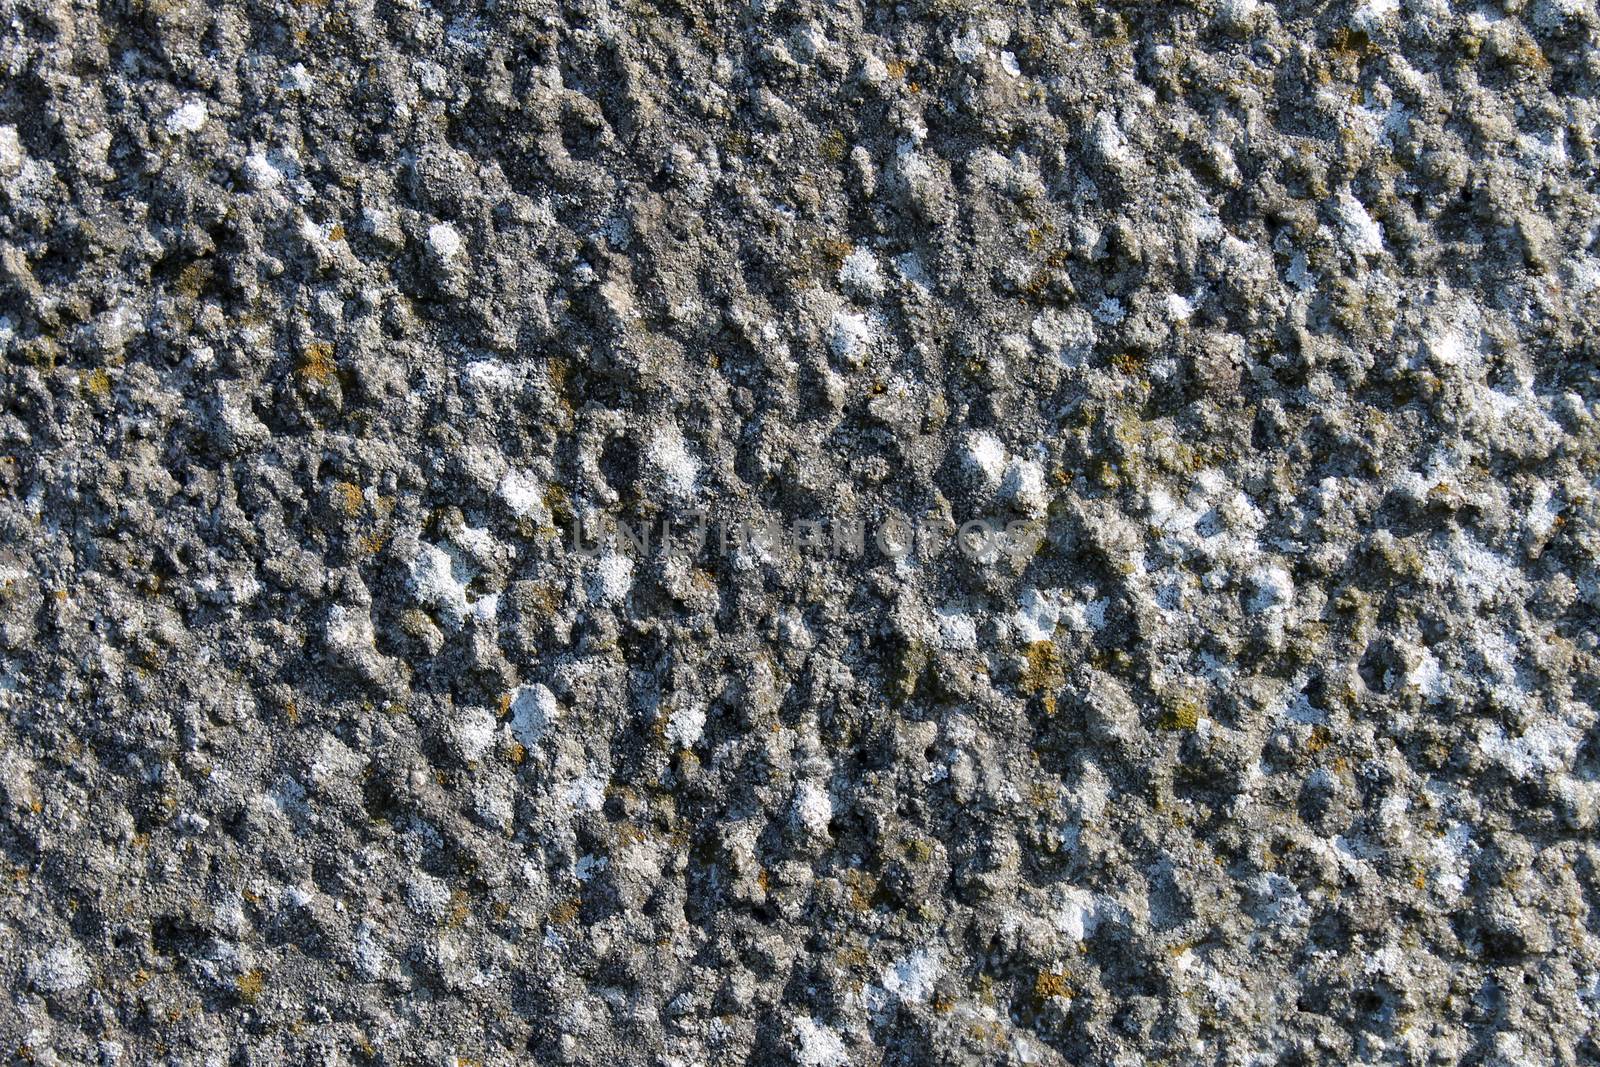 Abstract background of textured stone.